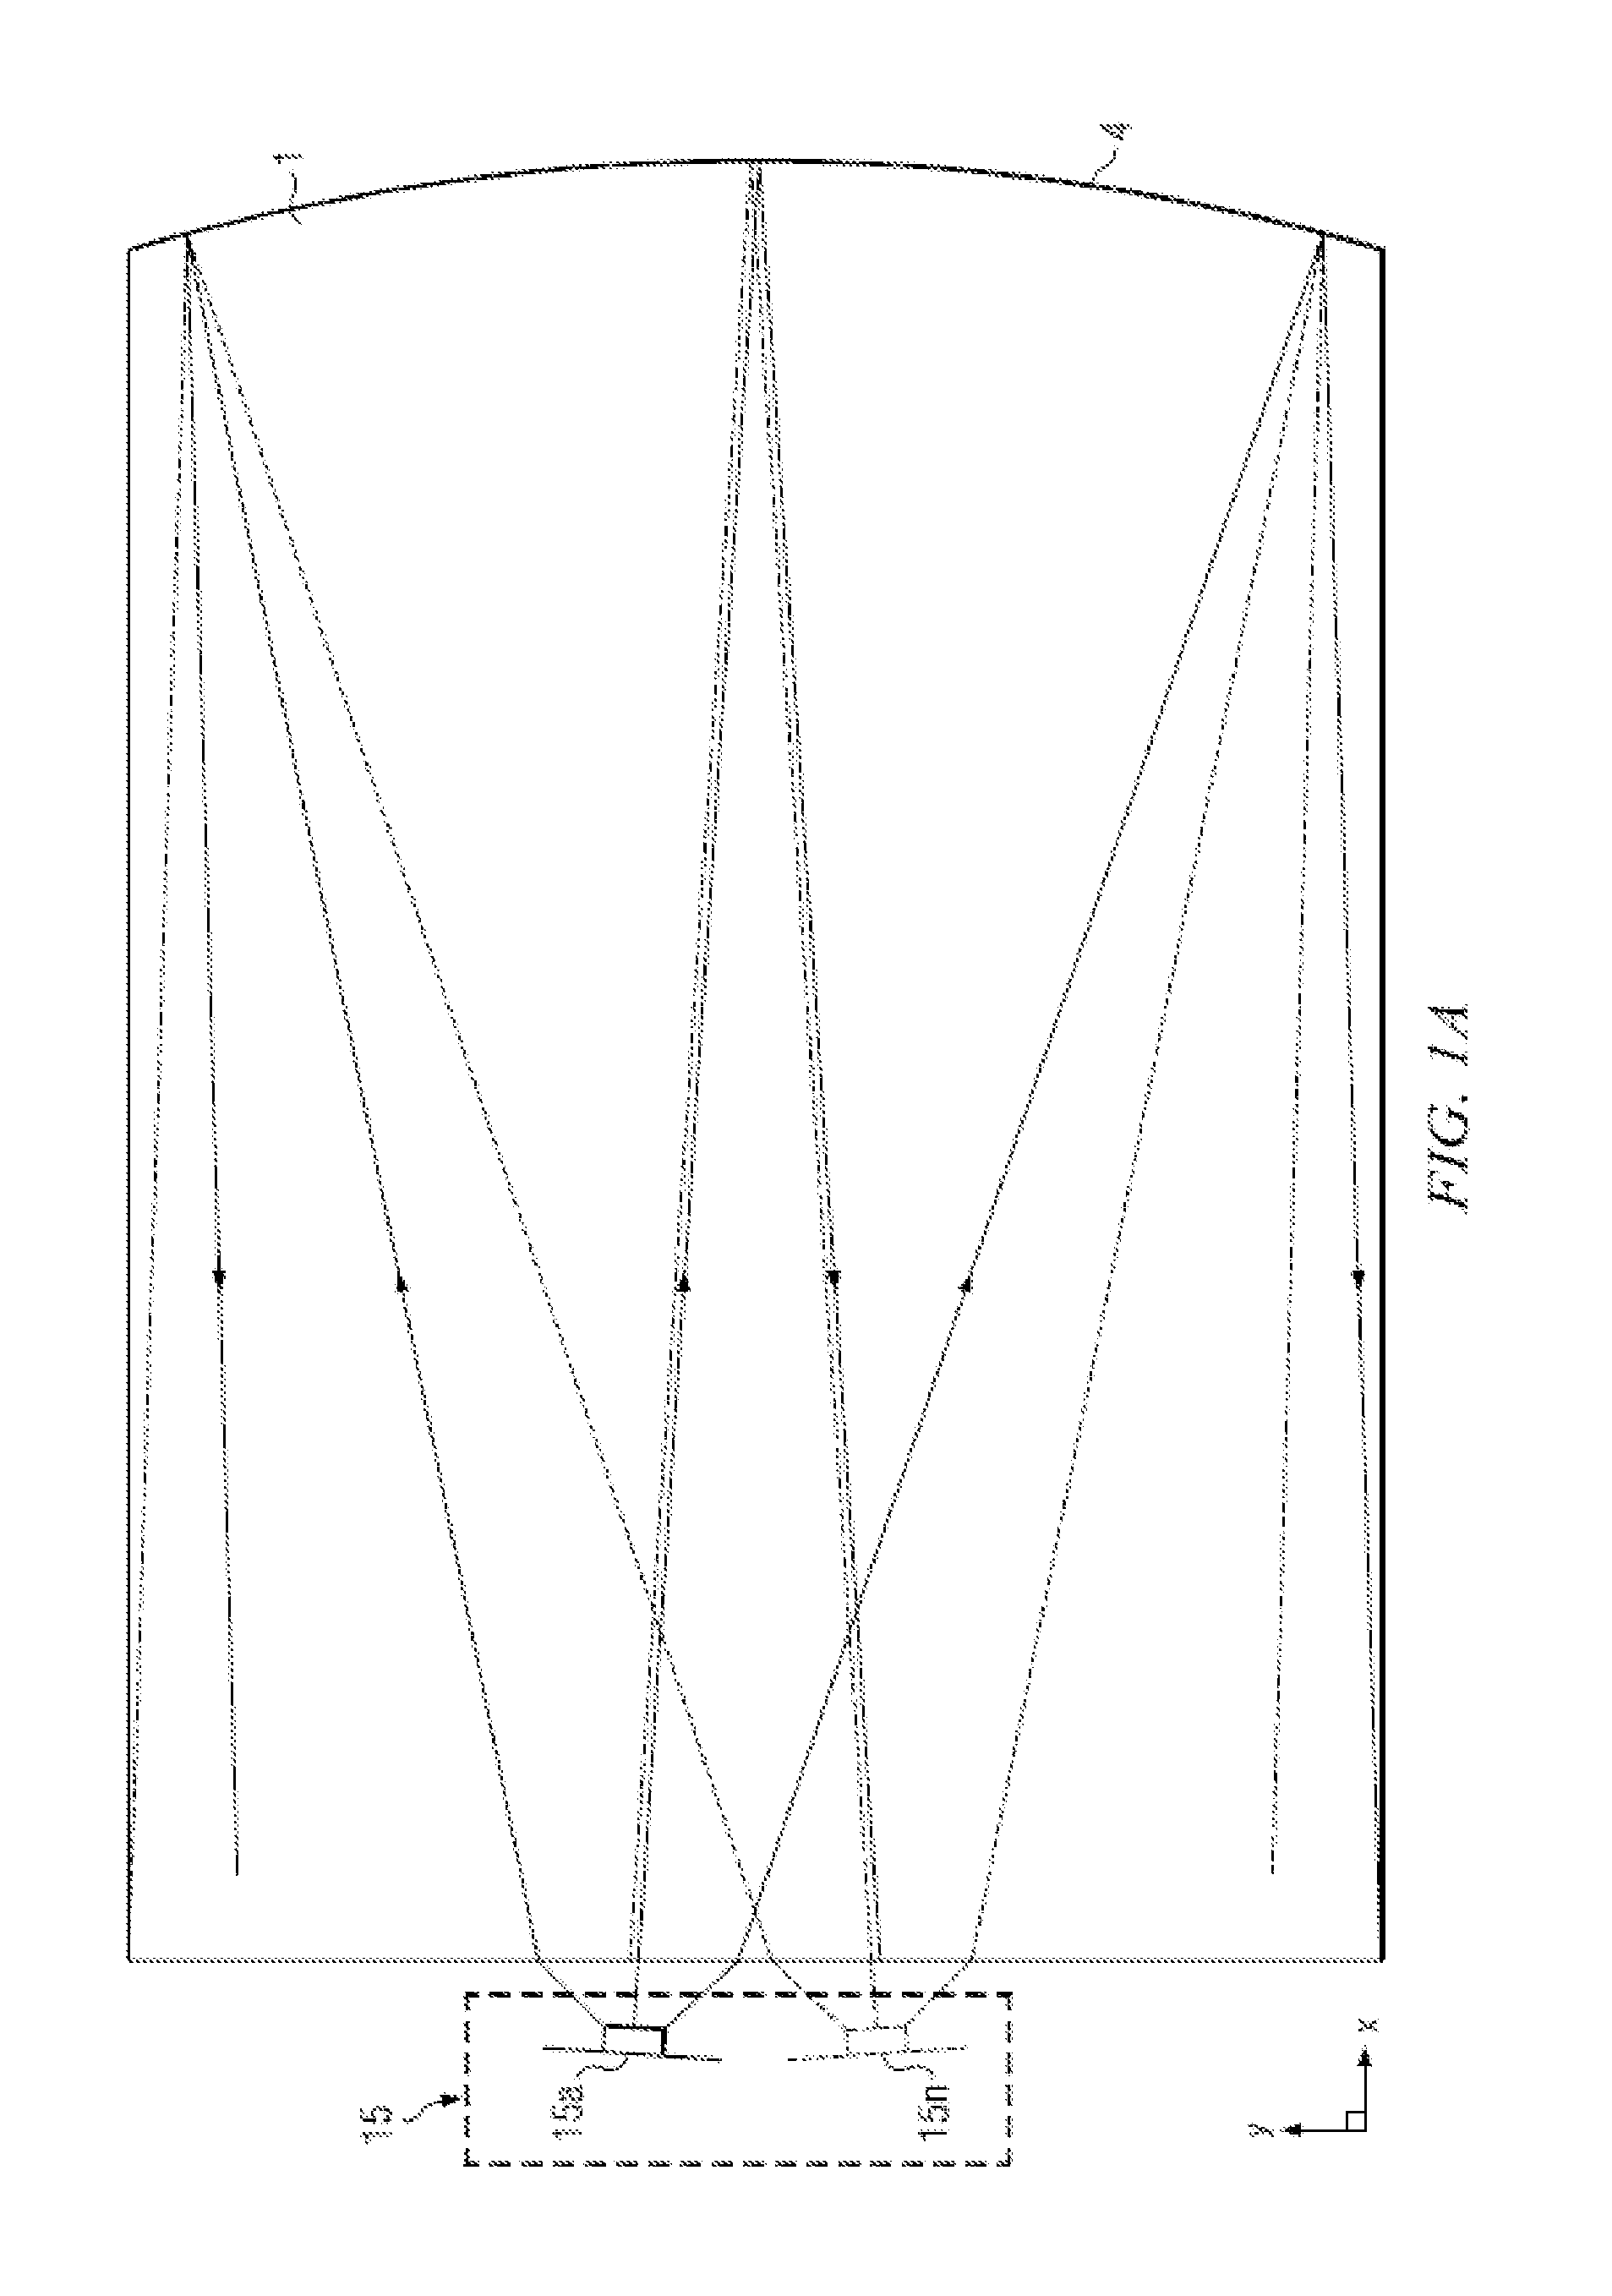 Polarization recovery in a directional display device